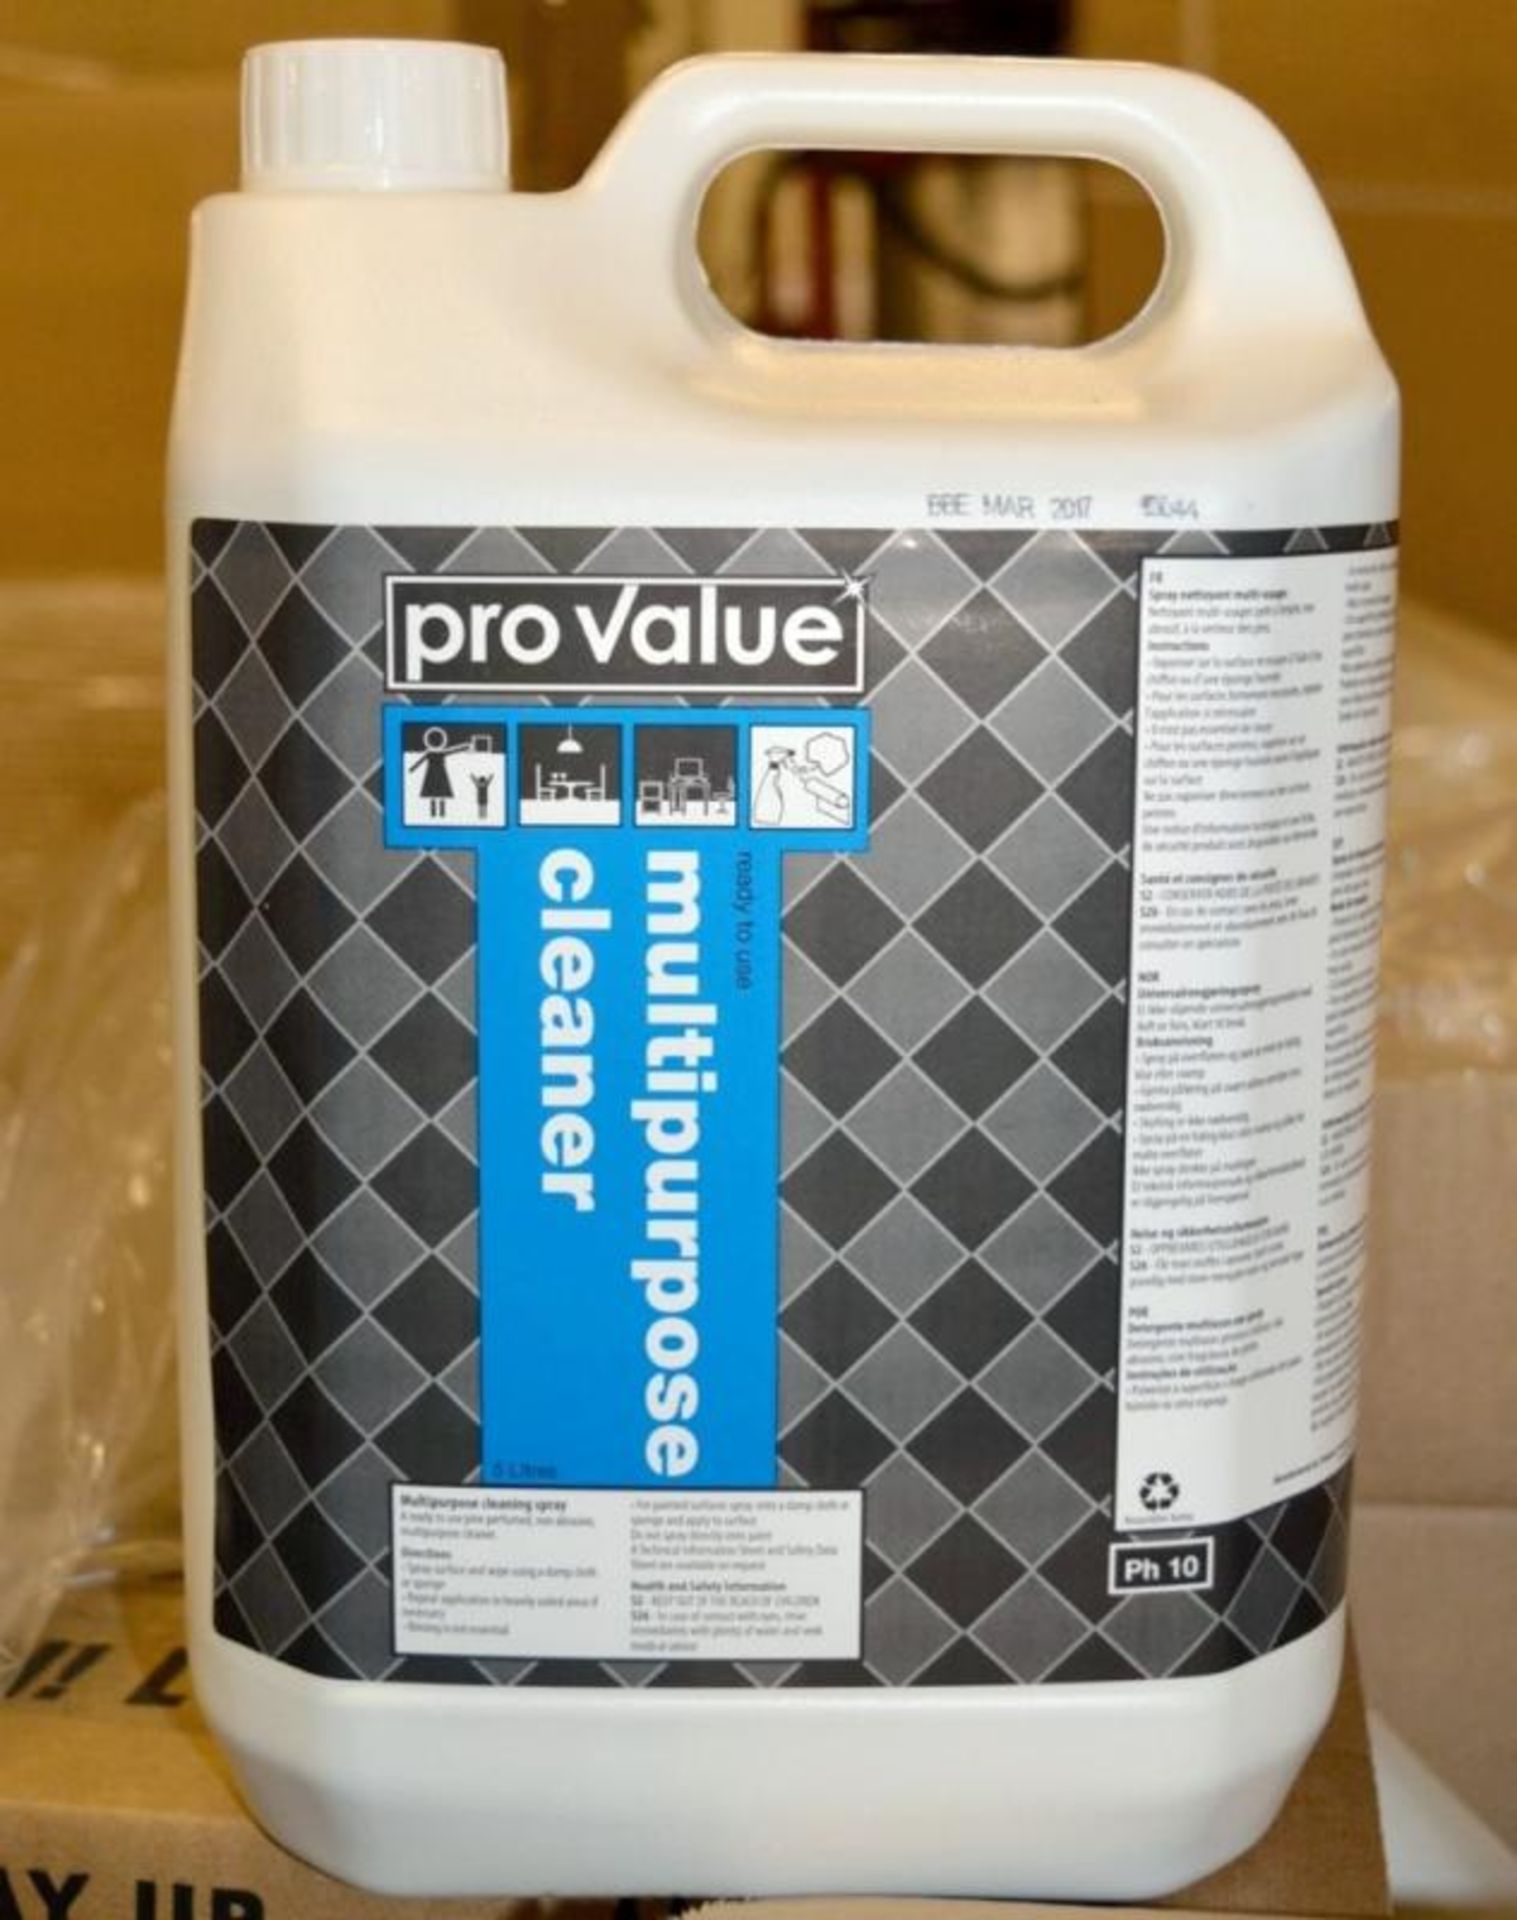 2 x Pro Value Multipurpose Cleaner - A Ready To Use Pine Scented, Non Abrasive Cleaner - Includes